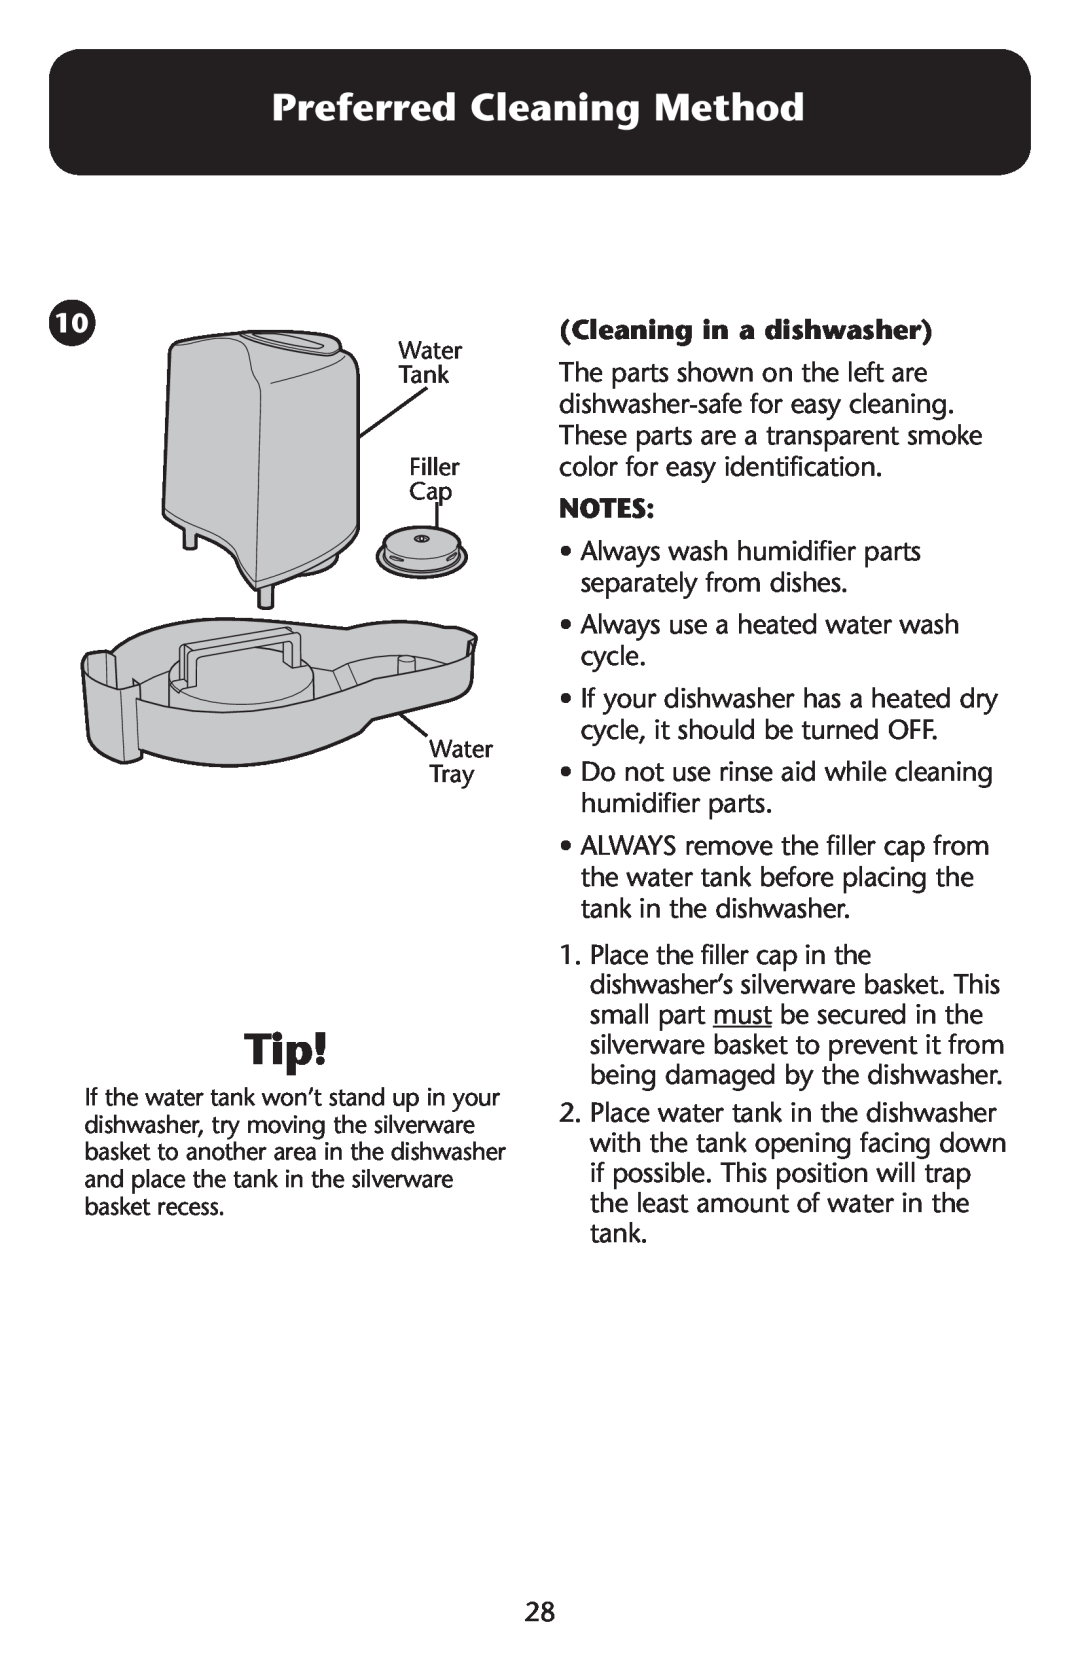 Graco ISPD023AB owner manual Preferred Cleaning Method, Cleaning in a dishwasher, Notes 